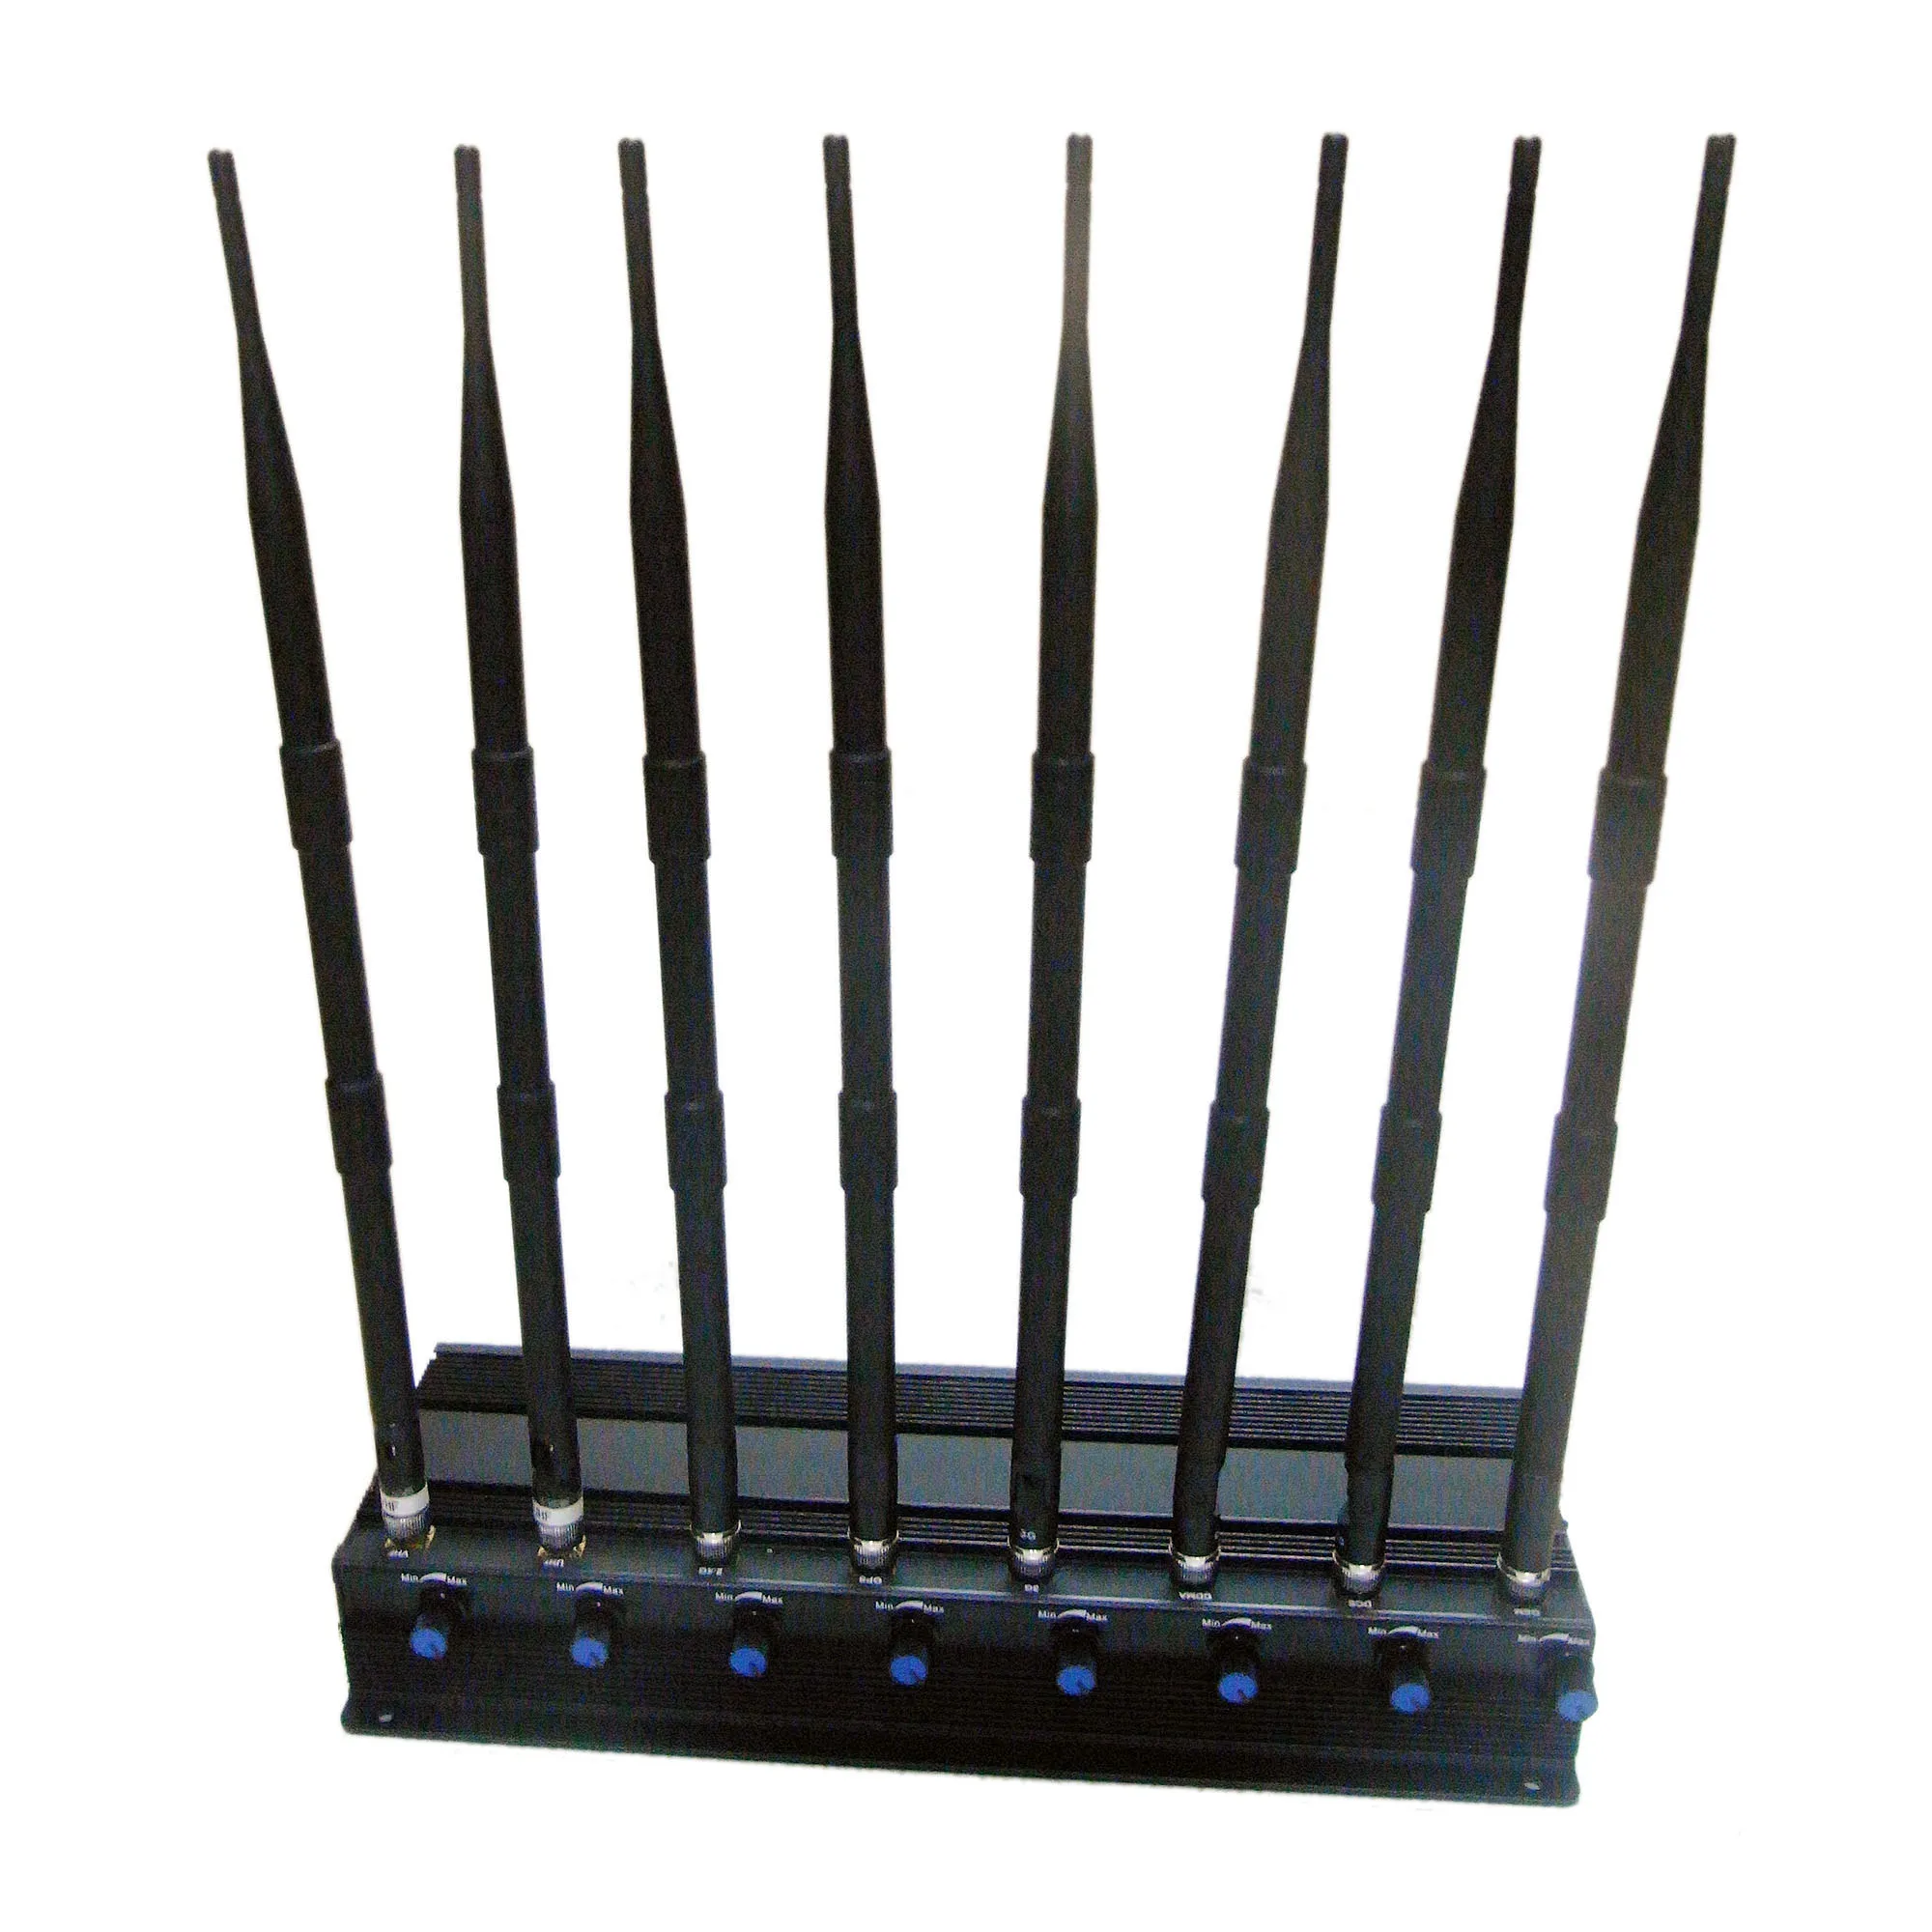 Wi-Fi Cell Phone Jammer